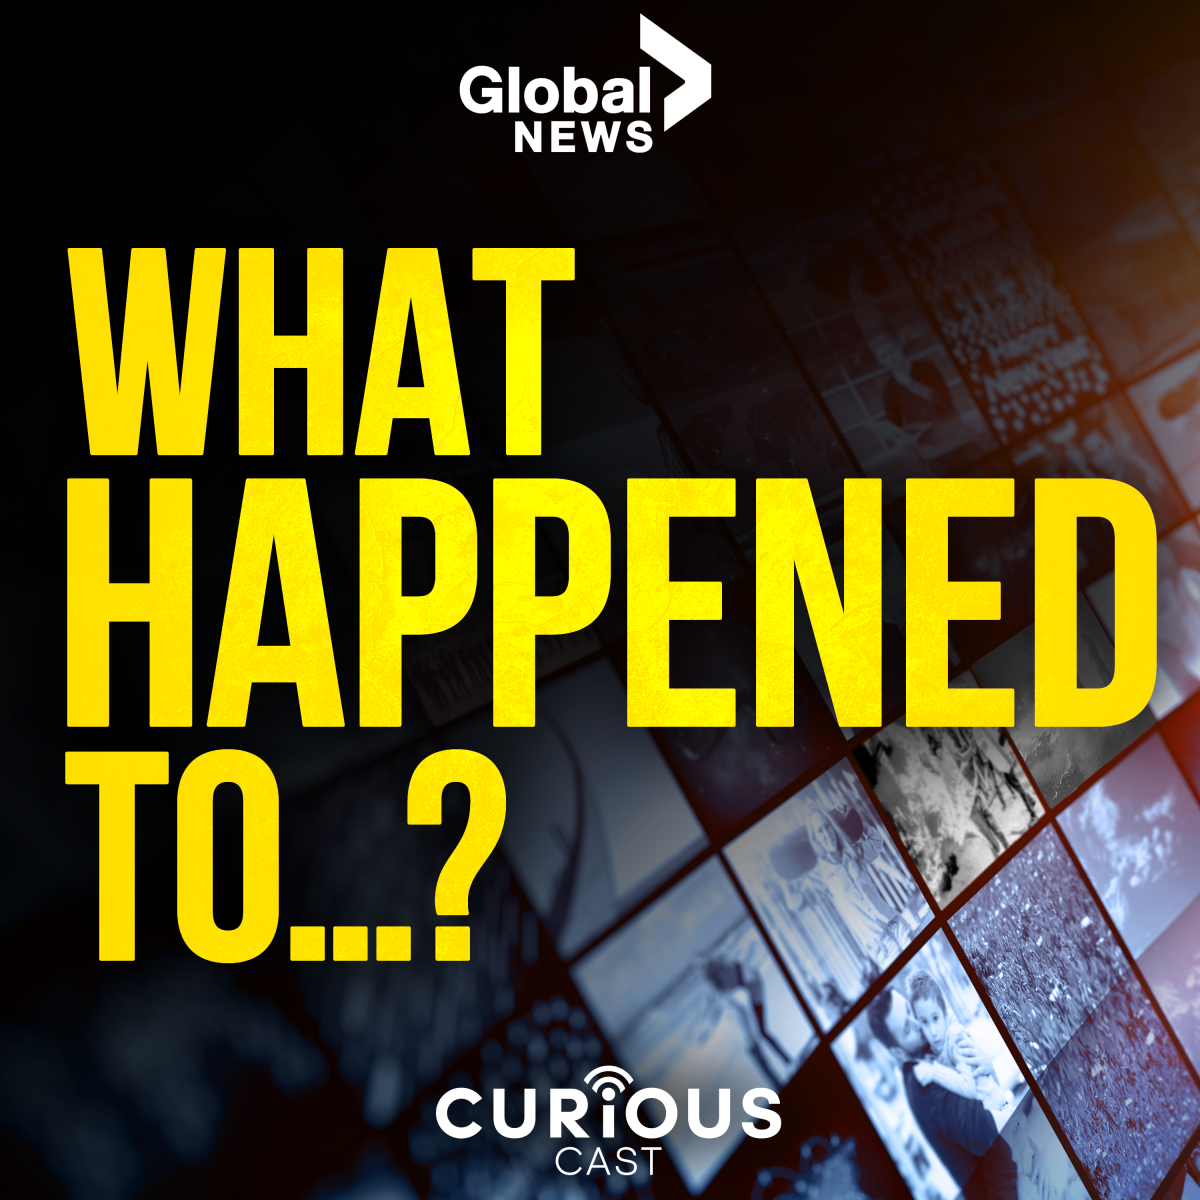 On this episode of the Global News podcast 'What happened to…?,' Erica Vella updates stories that were covered in Season 1 of the podcast, including the Quebec mosque shooting, Boko Haram and the Fukushima nuclear crisis.